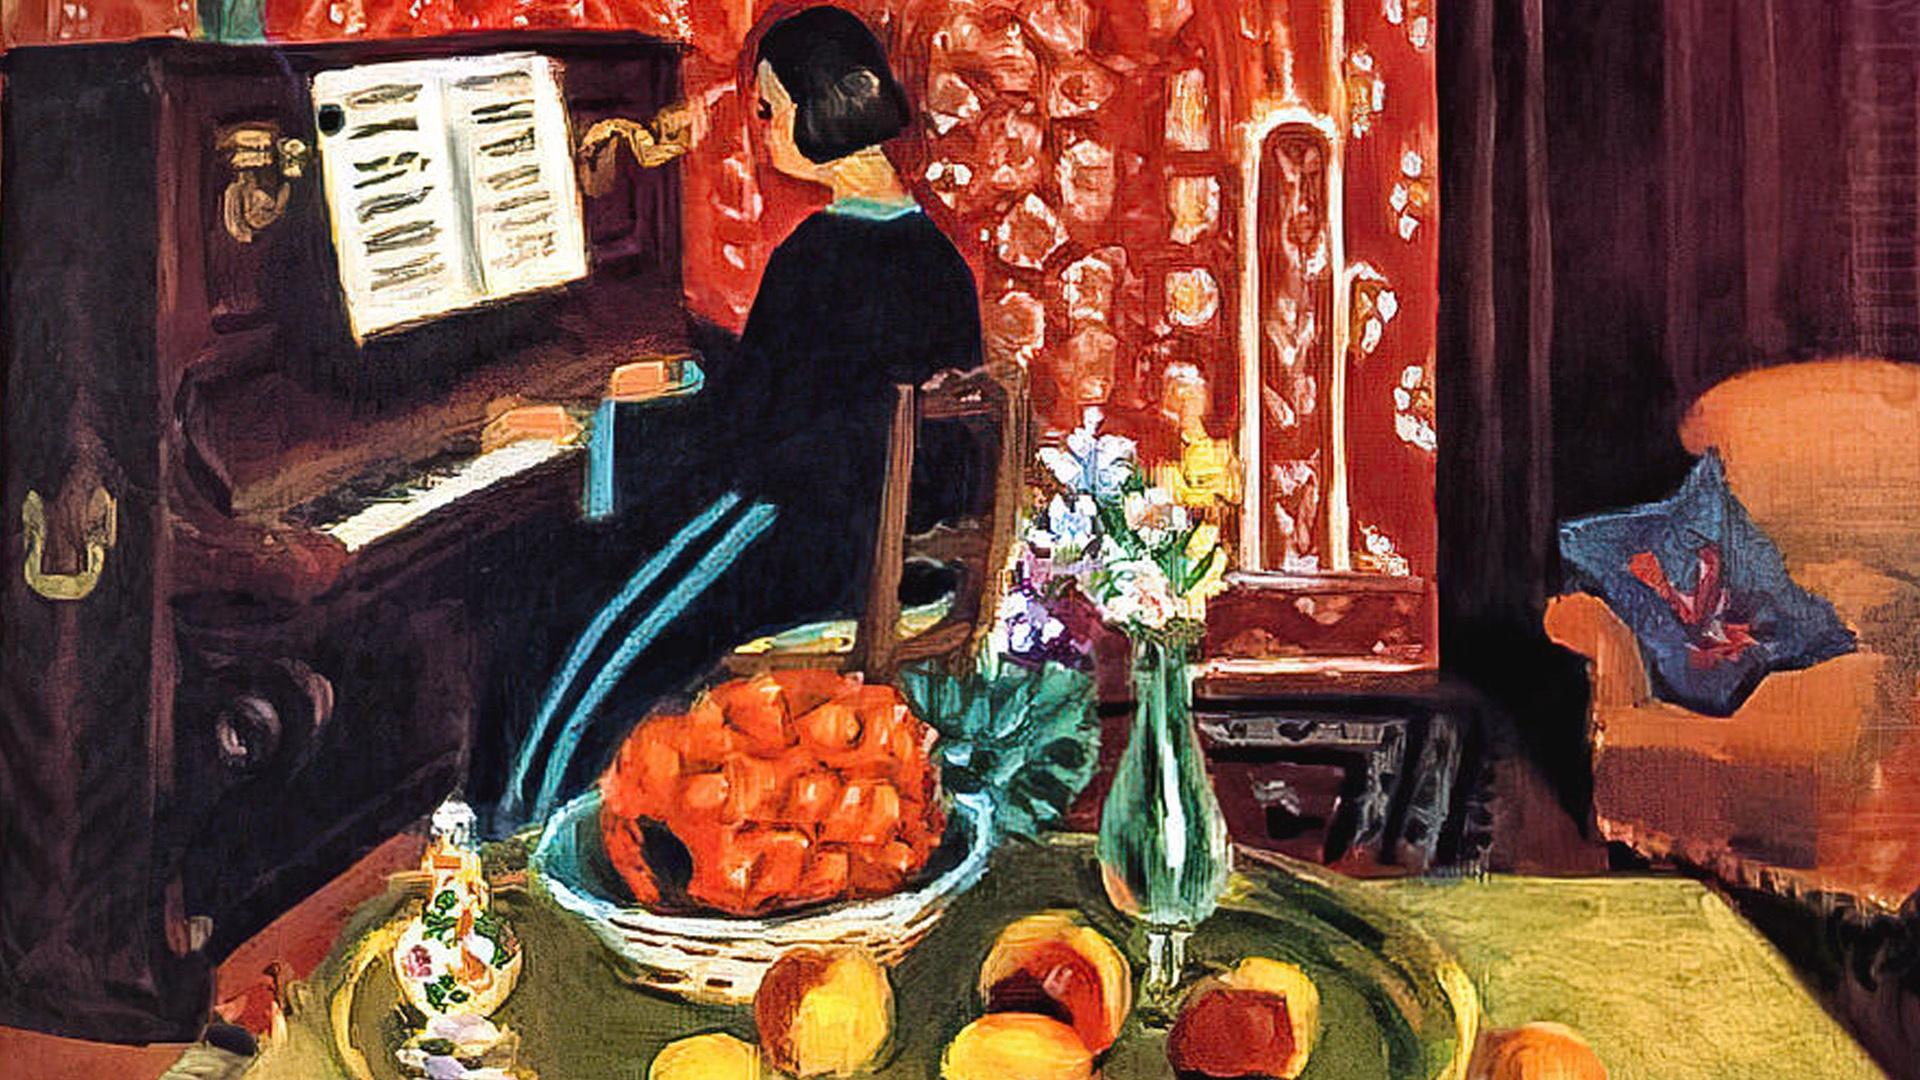 Piano Player and Still Life by Henri Matisse 1924 is a painting by Henri Matisse